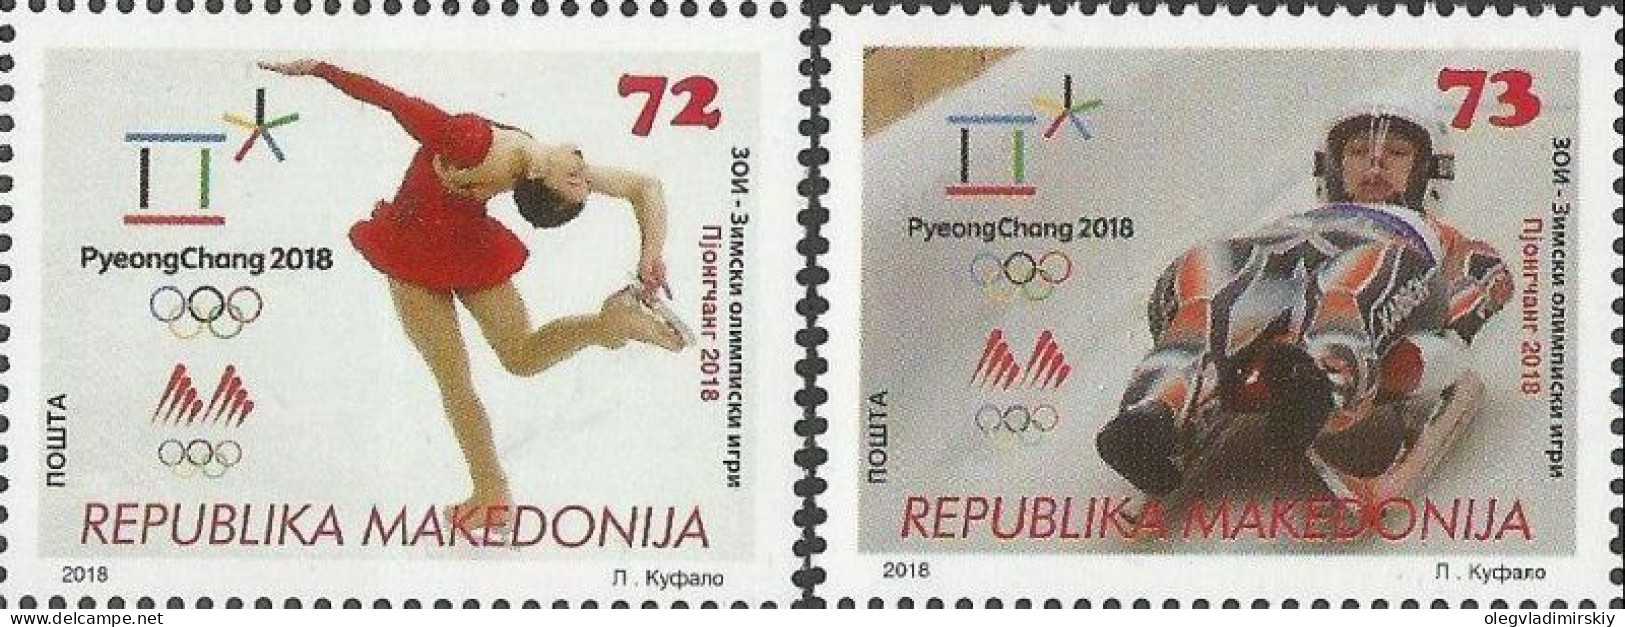 Macedonia 2018 Winter Olympic Games In Pyeongchang Olympics Set Of 2 Stamps MNH - Invierno 2018 : Pieonchang